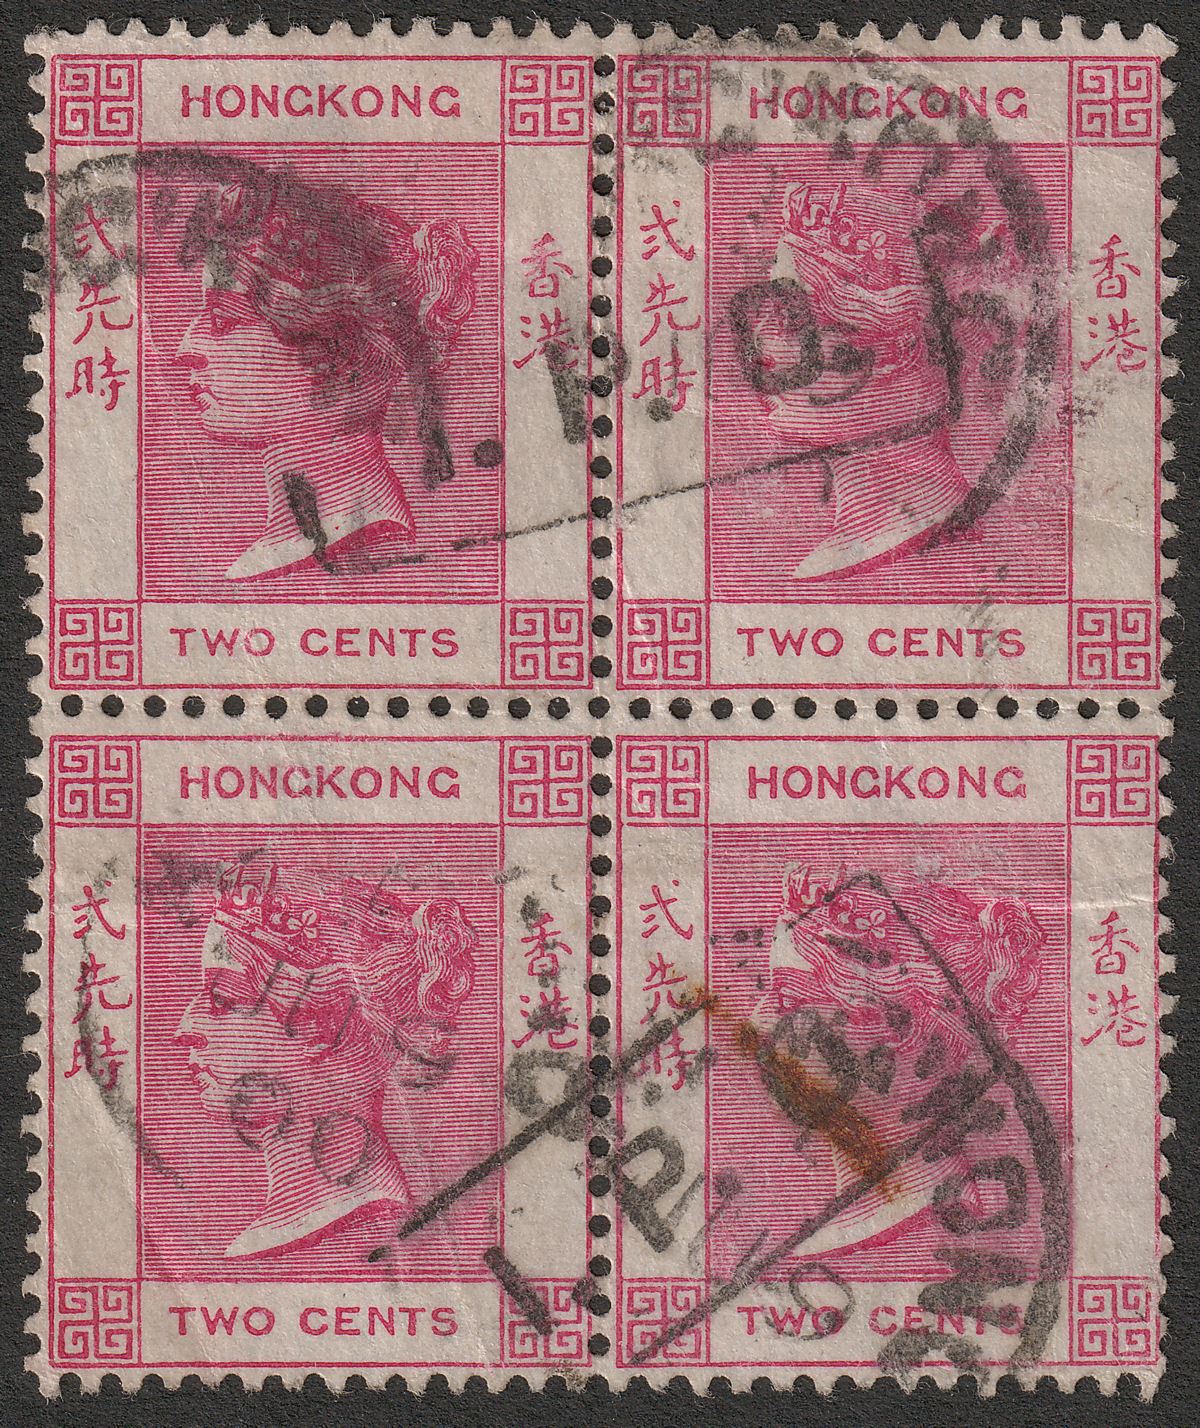 Hong Kong 1900 QV 2c Block of 4 Used with HK Postmarks + Amoy IPO Marks x2